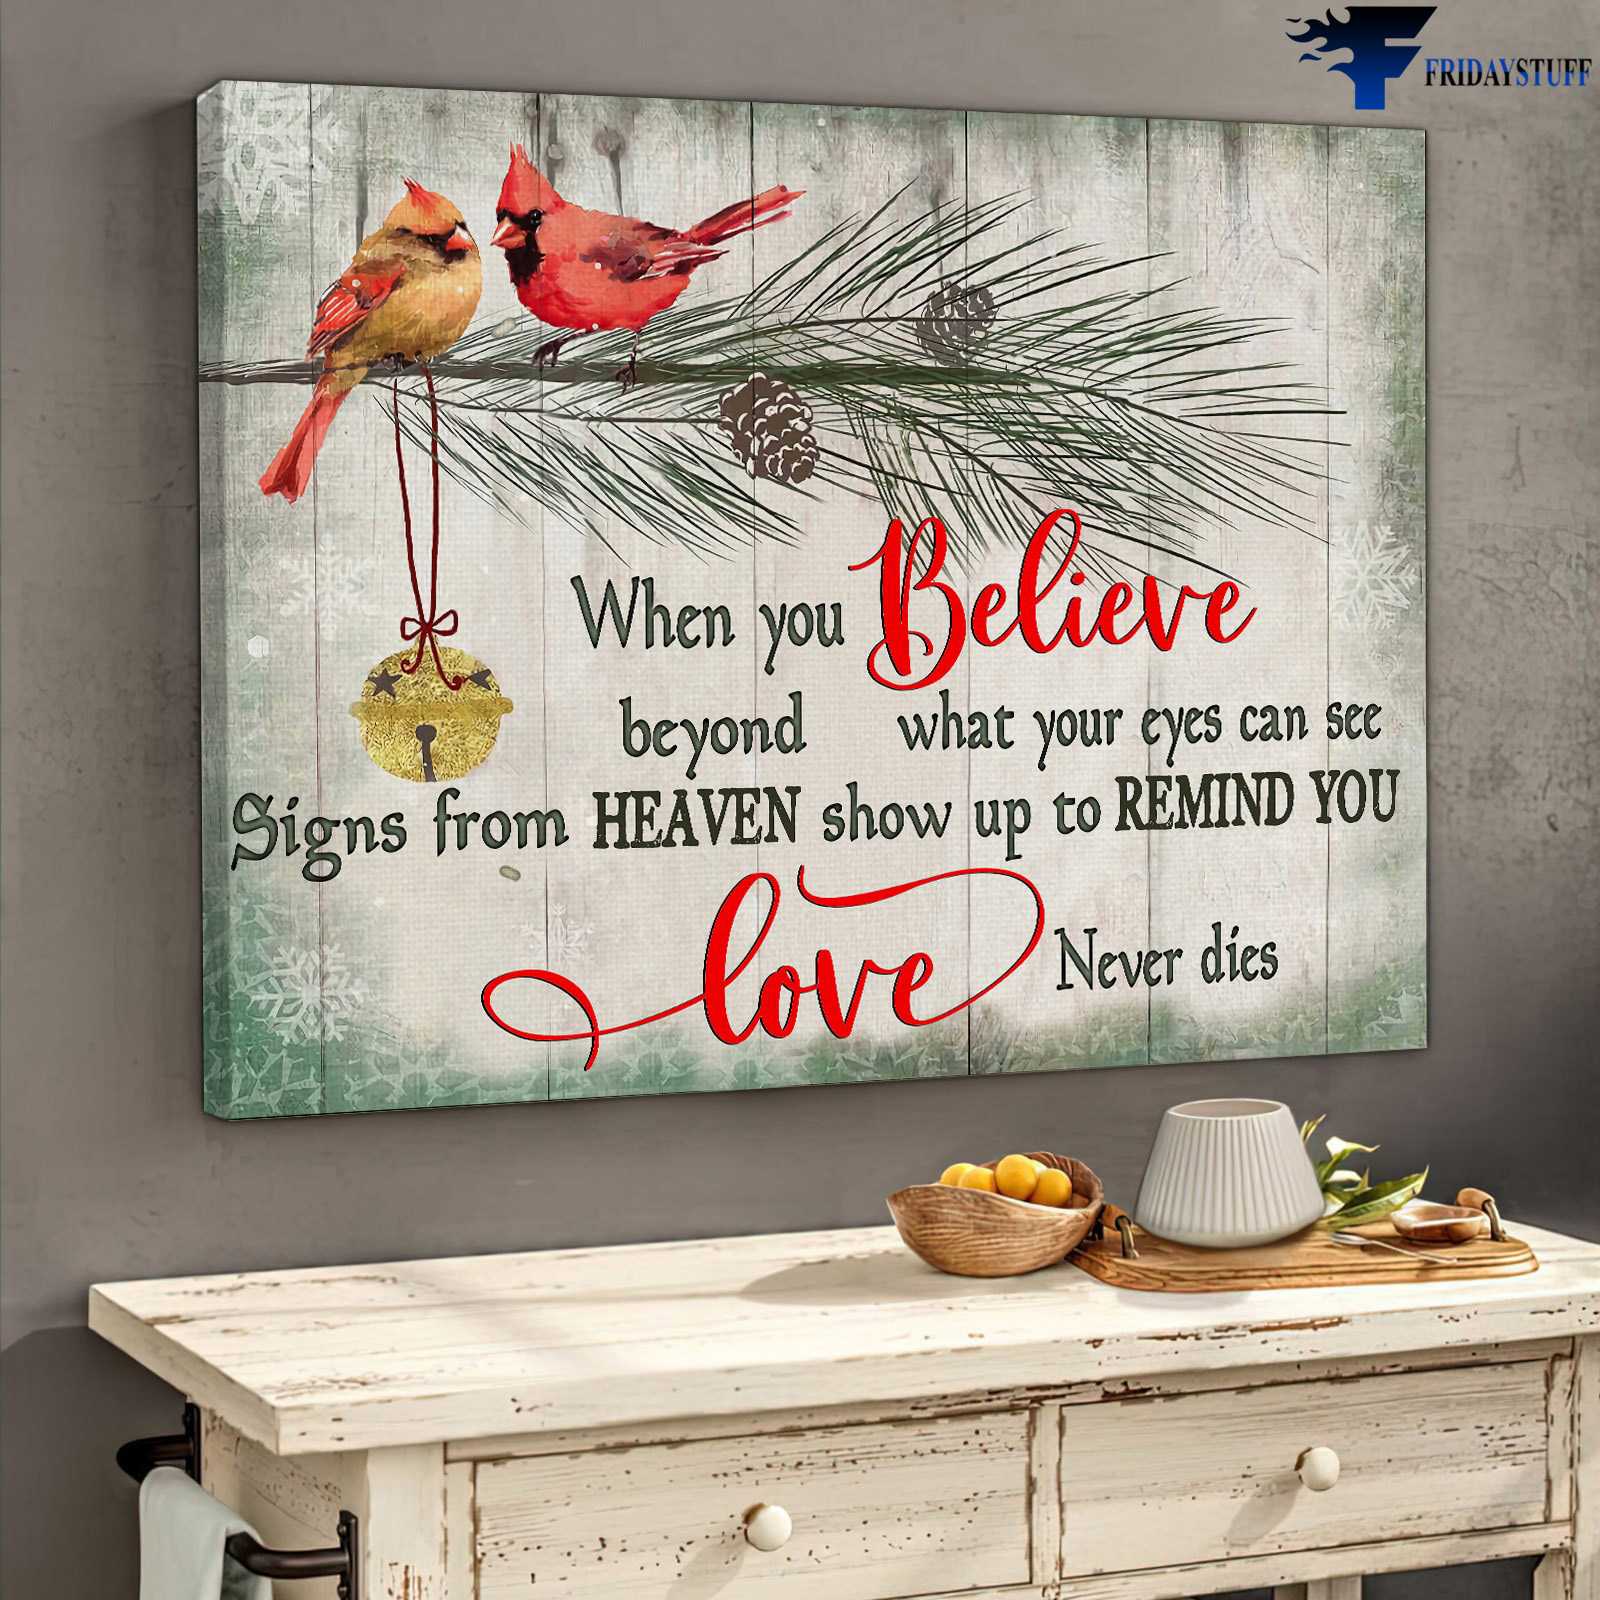 Cardinal Bird Couple, Pine Tree - When You Believe, Beyond What Your Eyes Can See, Signs From Heaven, Show Up To Remind You, Love Never Dies